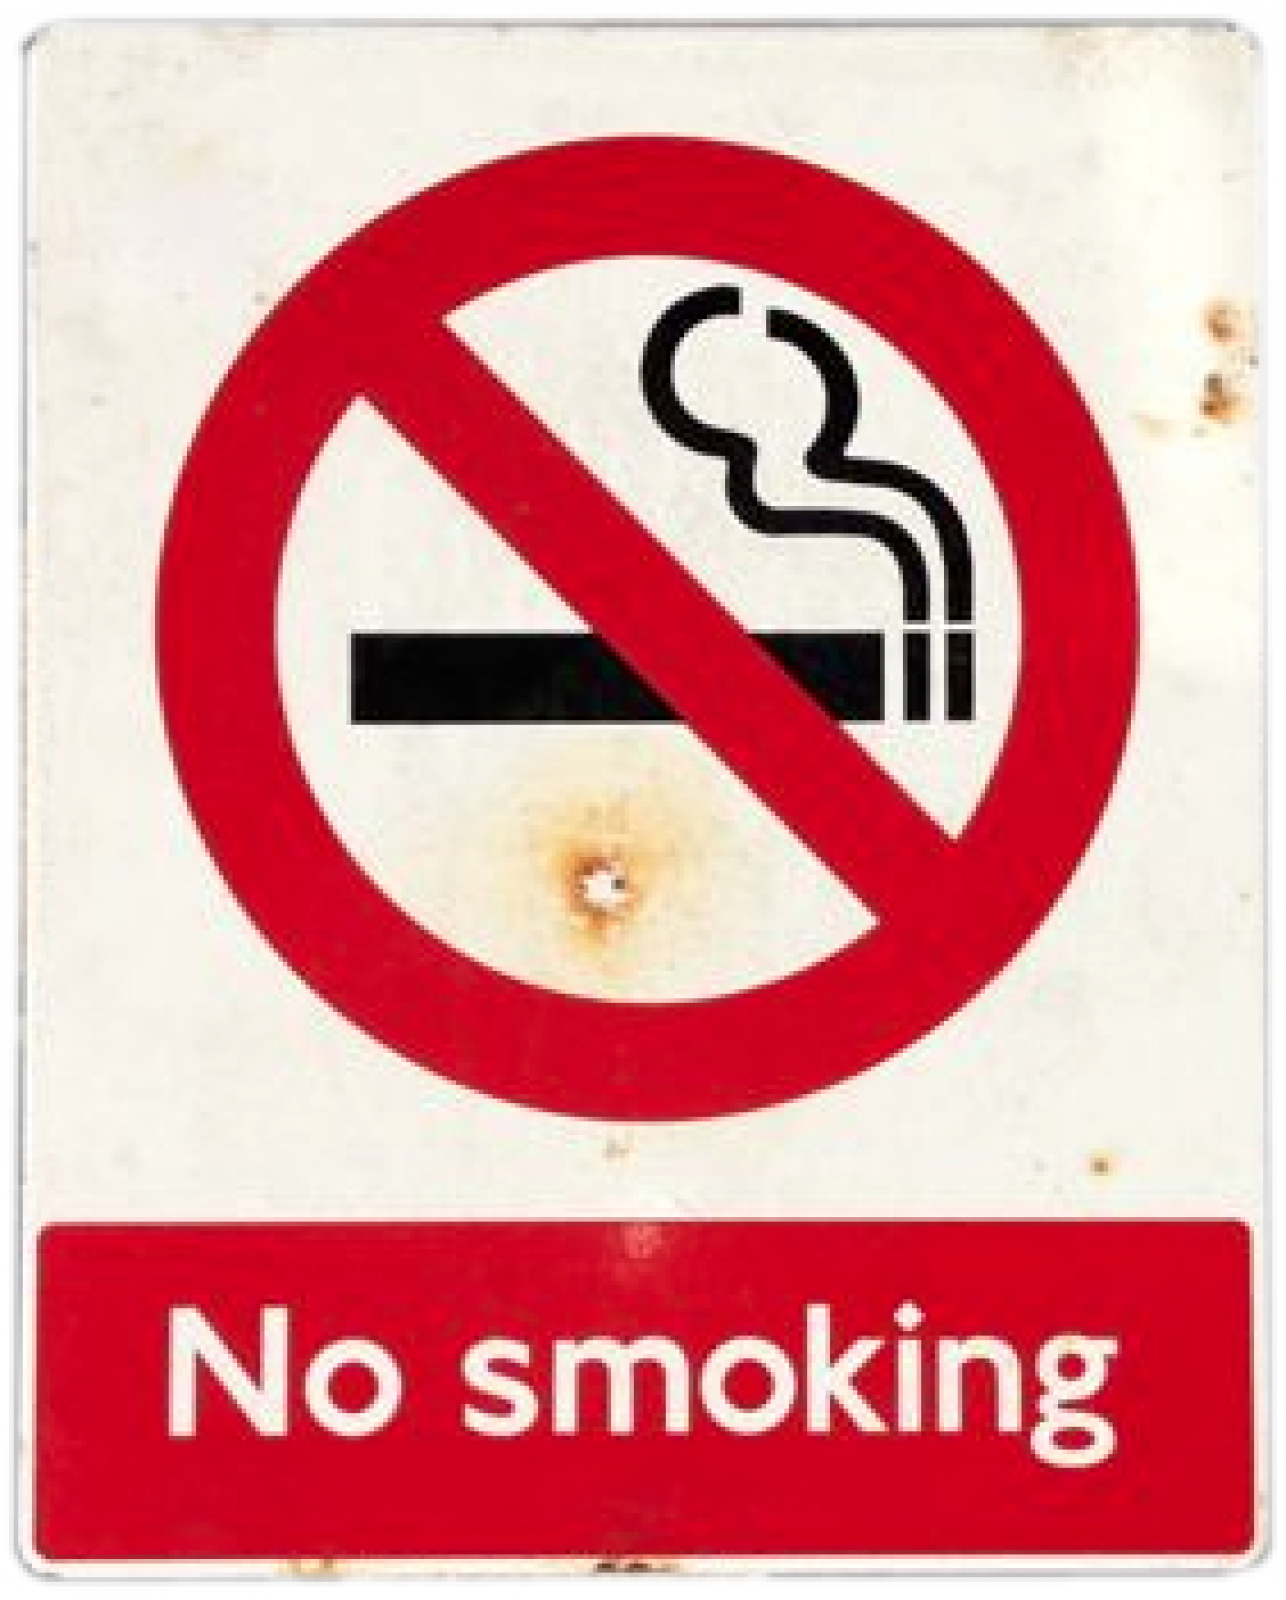 No Smoking Sign - Vintage from London Underground's Tube System